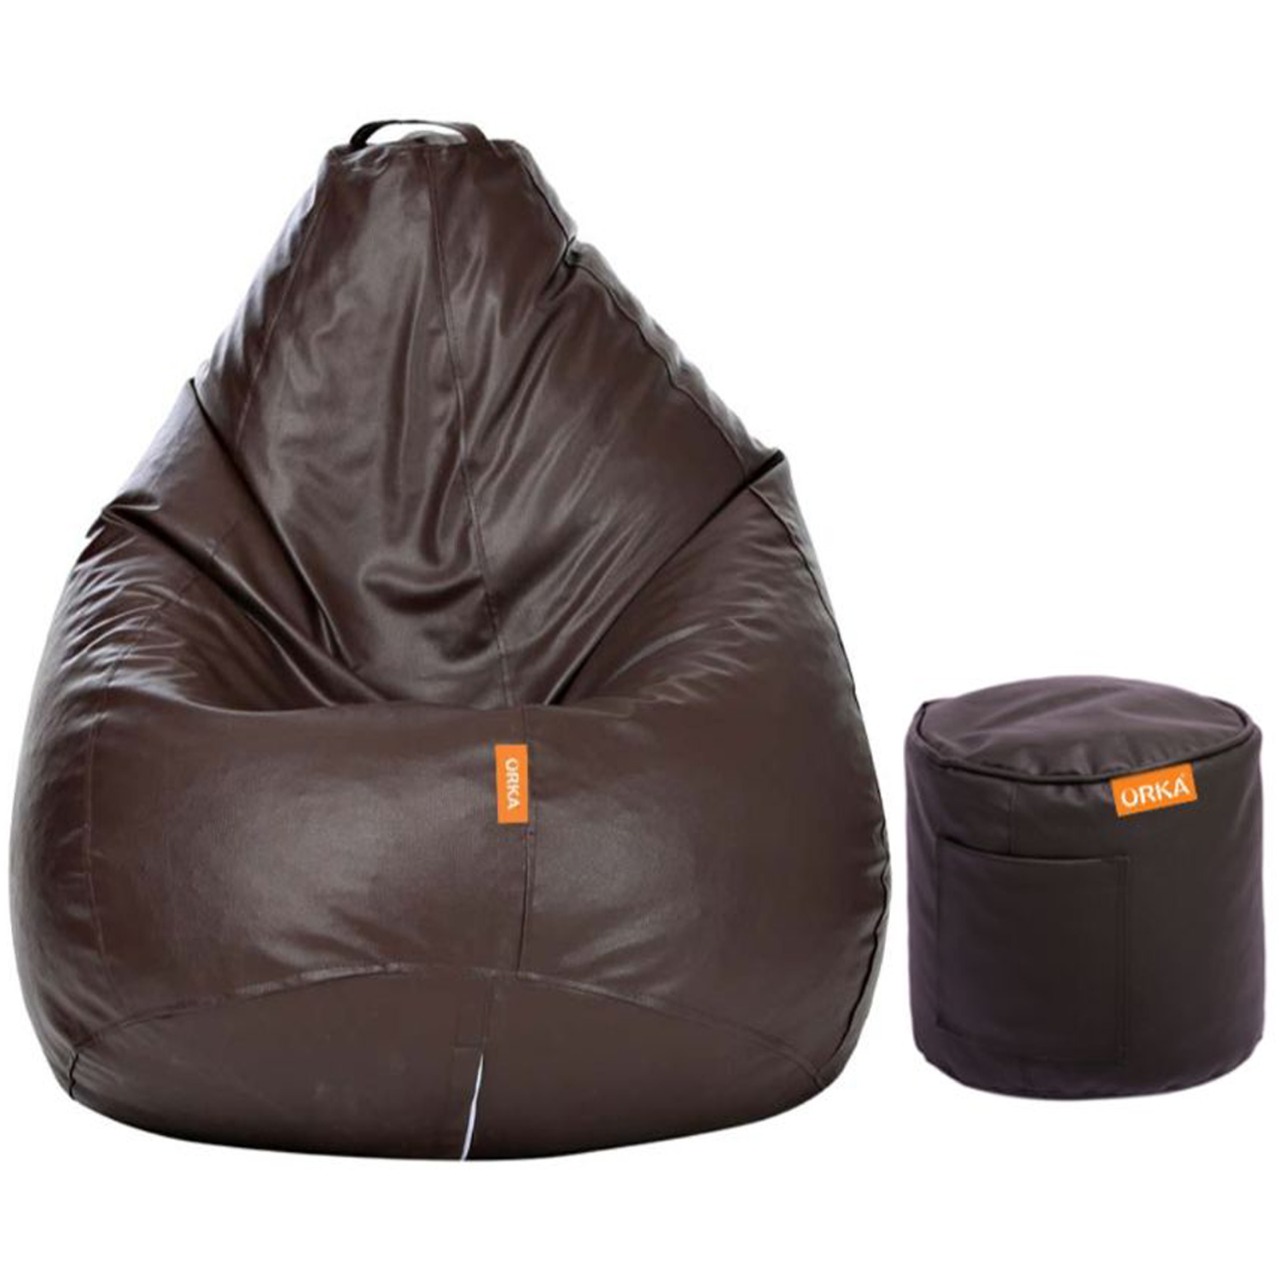 ORKA Classic Brown Bean Bag With Matching Puffy  Kids  Bean Bag Cover 